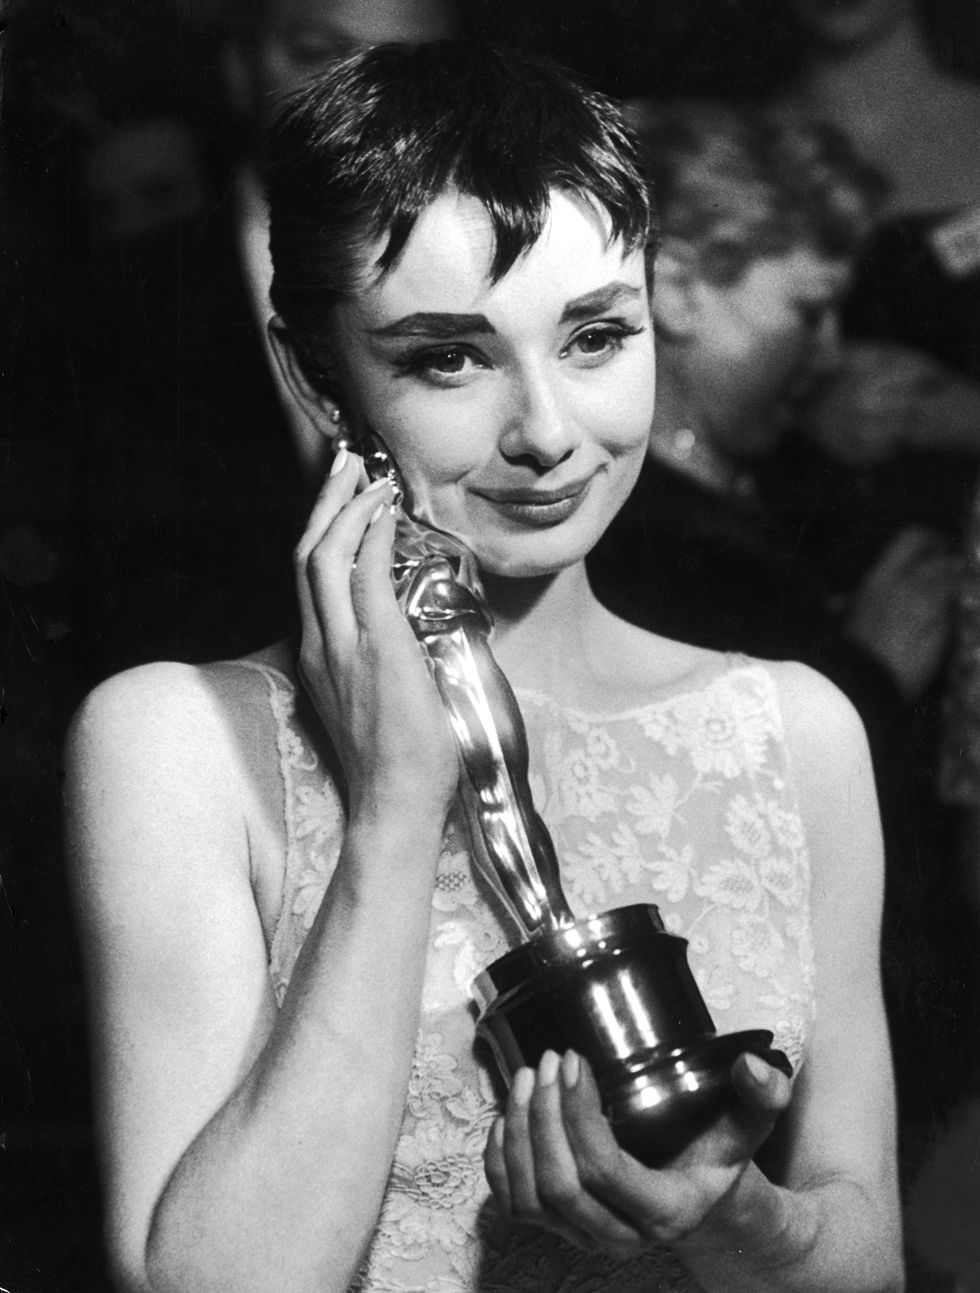 audrey hepburn holding the oscar she won for her performance in the 'roman holiday'